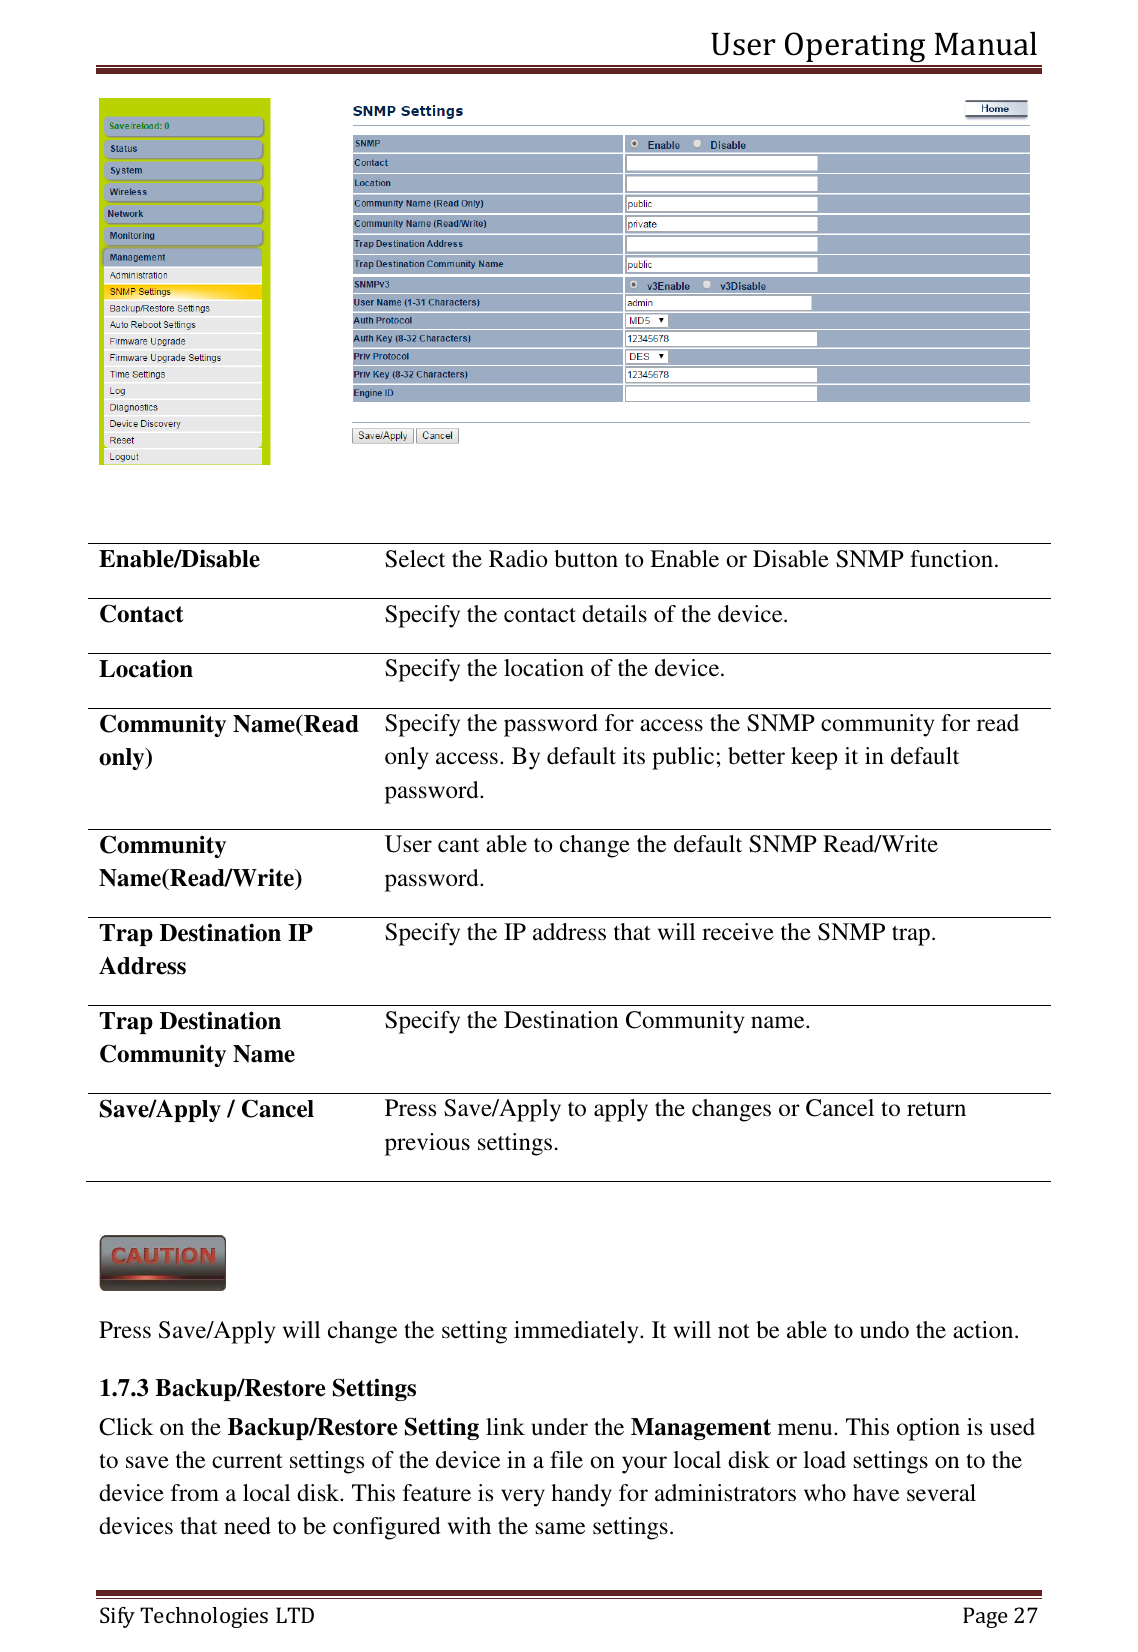 User Operating Manual   Sify Technologies LTD   Page 27   Enable/Disable Select the Radio button to Enable or Disable SNMP function. Contact Specify the contact details of the device. Location Specify the location of the device. Community Name(Read only) Specify the password for access the SNMP community for read only access. By default its public; better keep it in default password. Community Name(Read/Write) User cant able to change the default SNMP Read/Write password. Trap Destination IP Address Specify the IP address that will receive the SNMP trap. Trap Destination Community Name Specify the Destination Community name. Save/Apply / Cancel Press Save/Apply to apply the changes or Cancel to return previous settings.   Press Save/Apply will change the setting immediately. It will not be able to undo the action. 1.7.3 Backup/Restore Settings Click on the Backup/Restore Setting link under the Management menu. This option is used to save the current settings of the device in a file on your local disk or load settings on to the device from a local disk. This feature is very handy for administrators who have several devices that need to be configured with the same settings. 